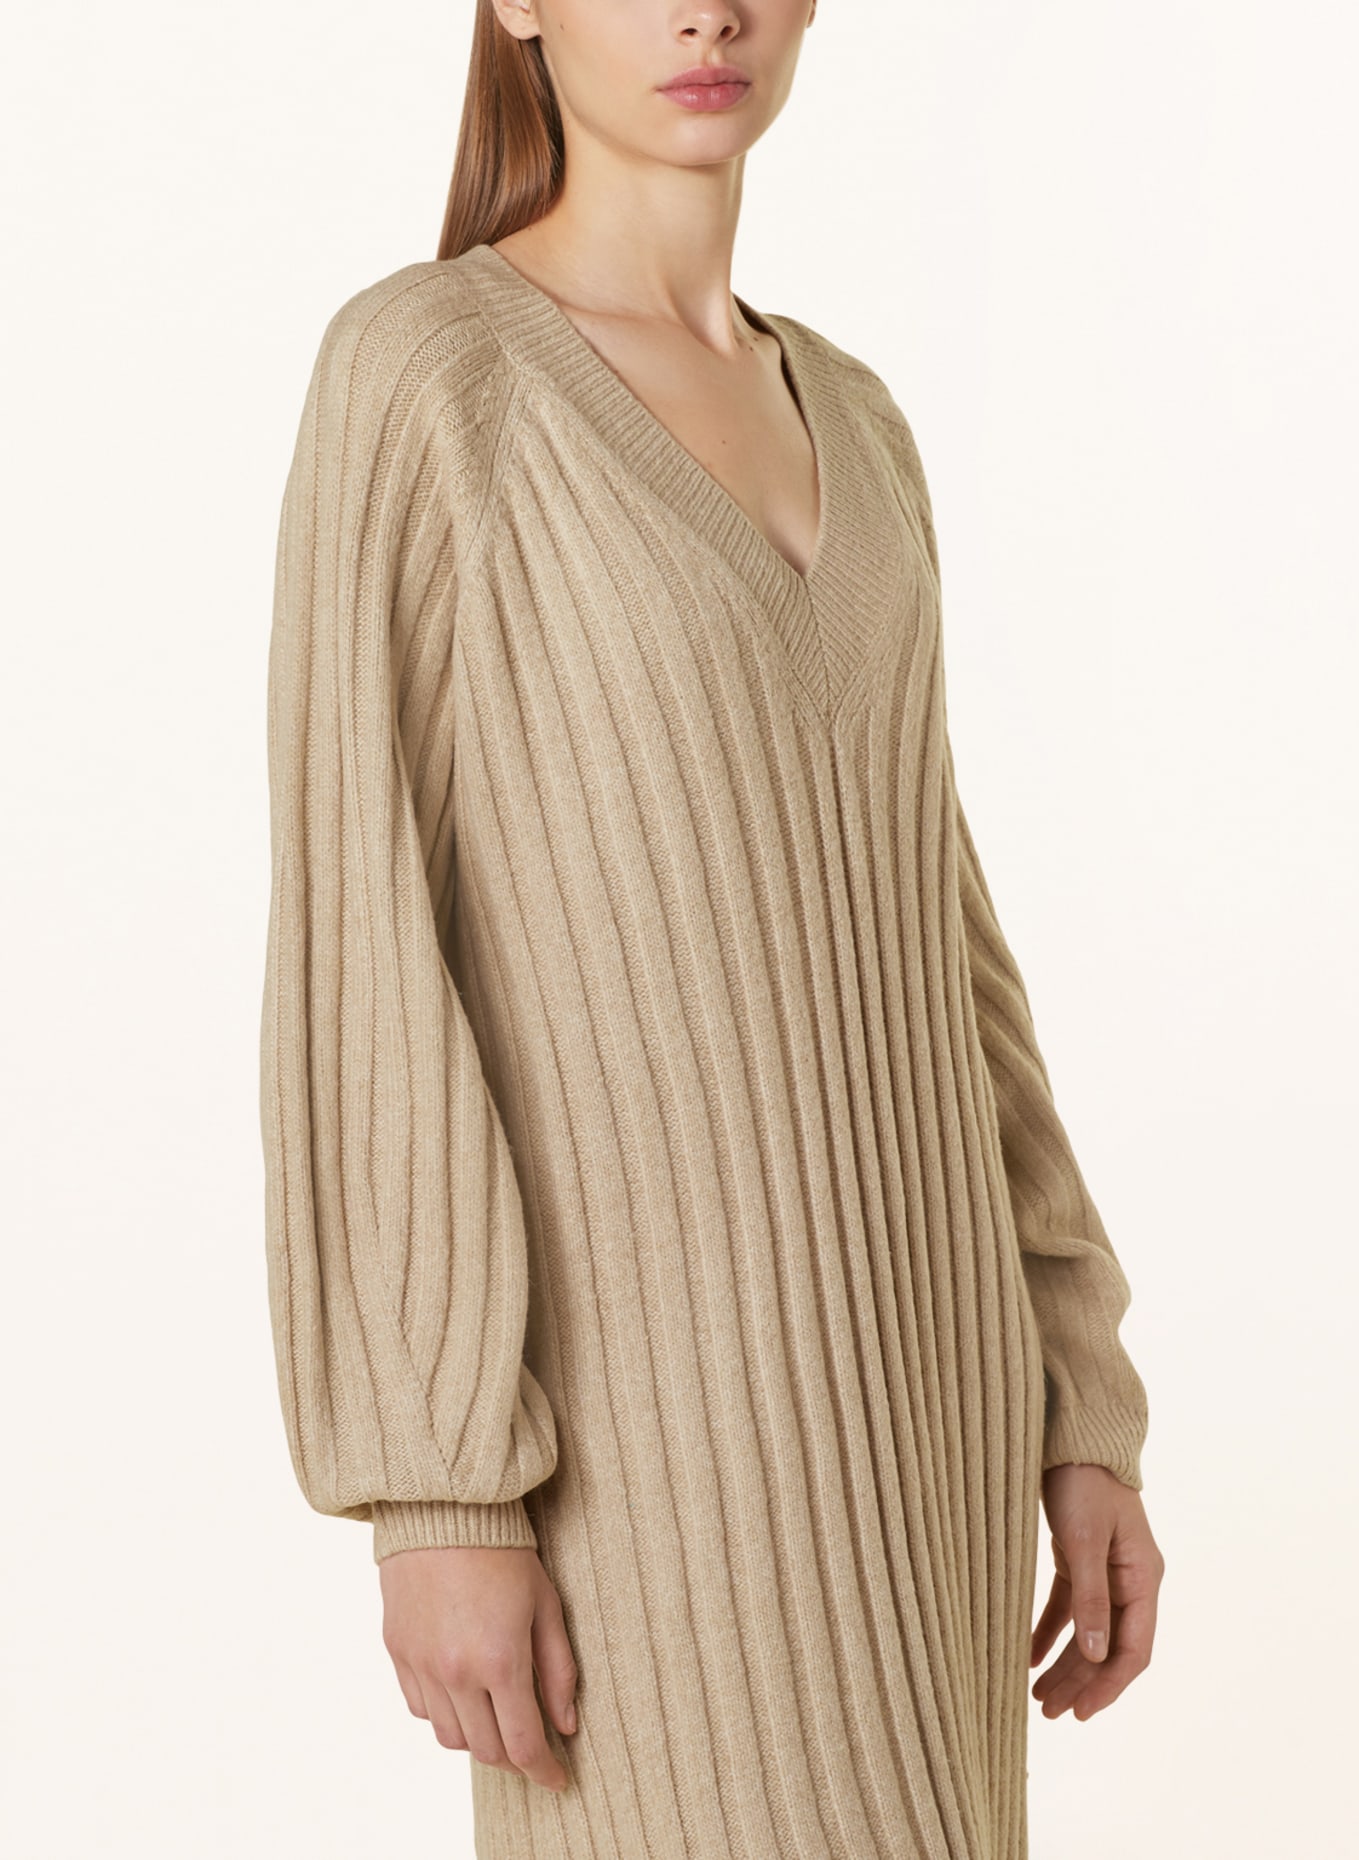 gina tricot Knit dress, Color: LIGHT BROWN (Image 4)